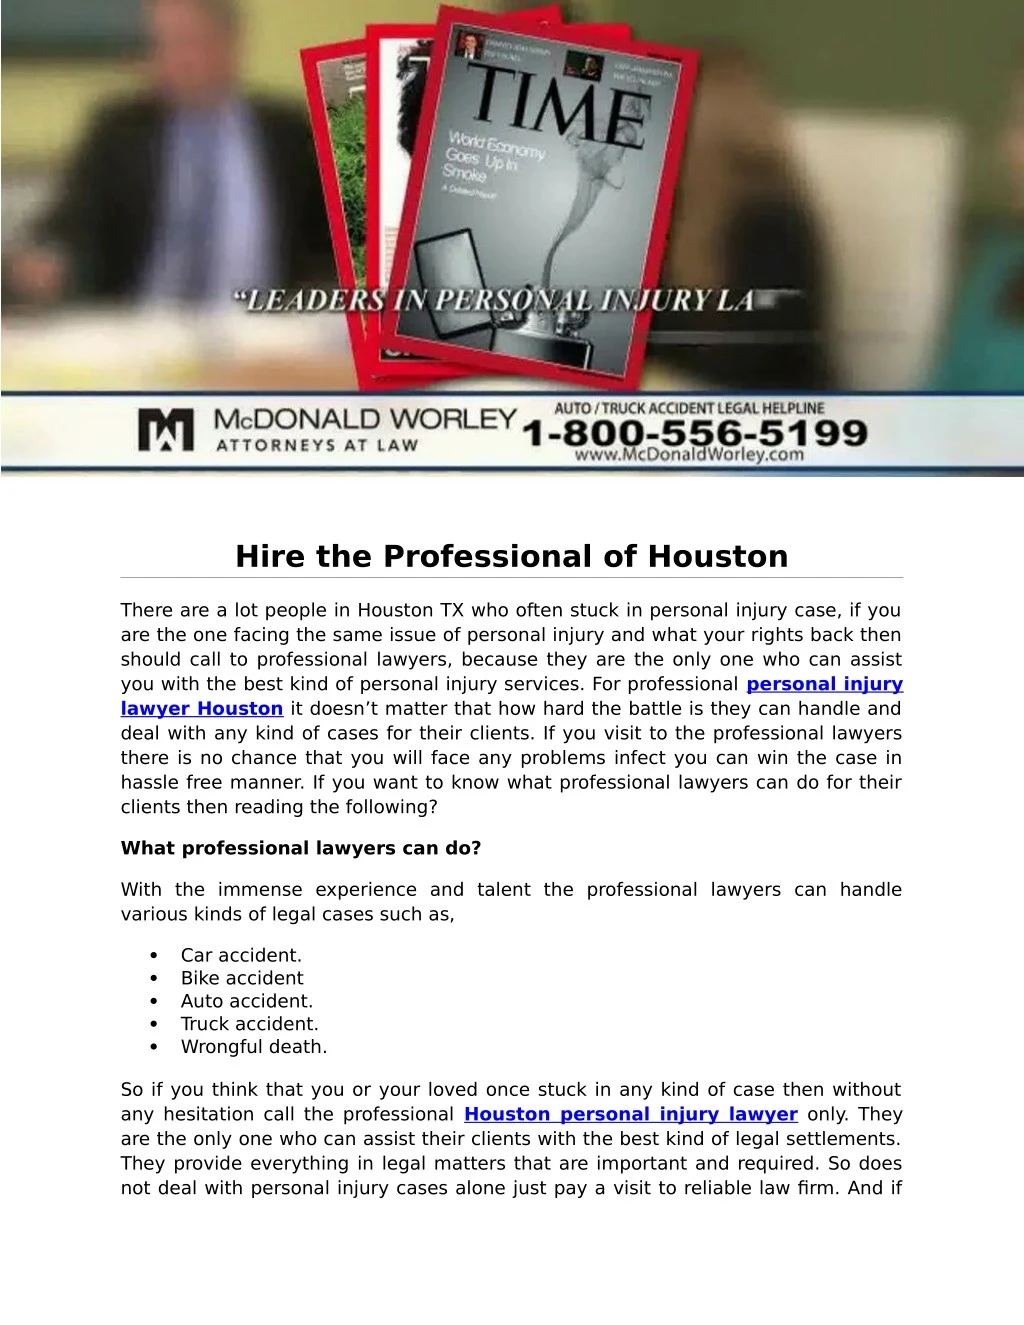 hire the professional of houston